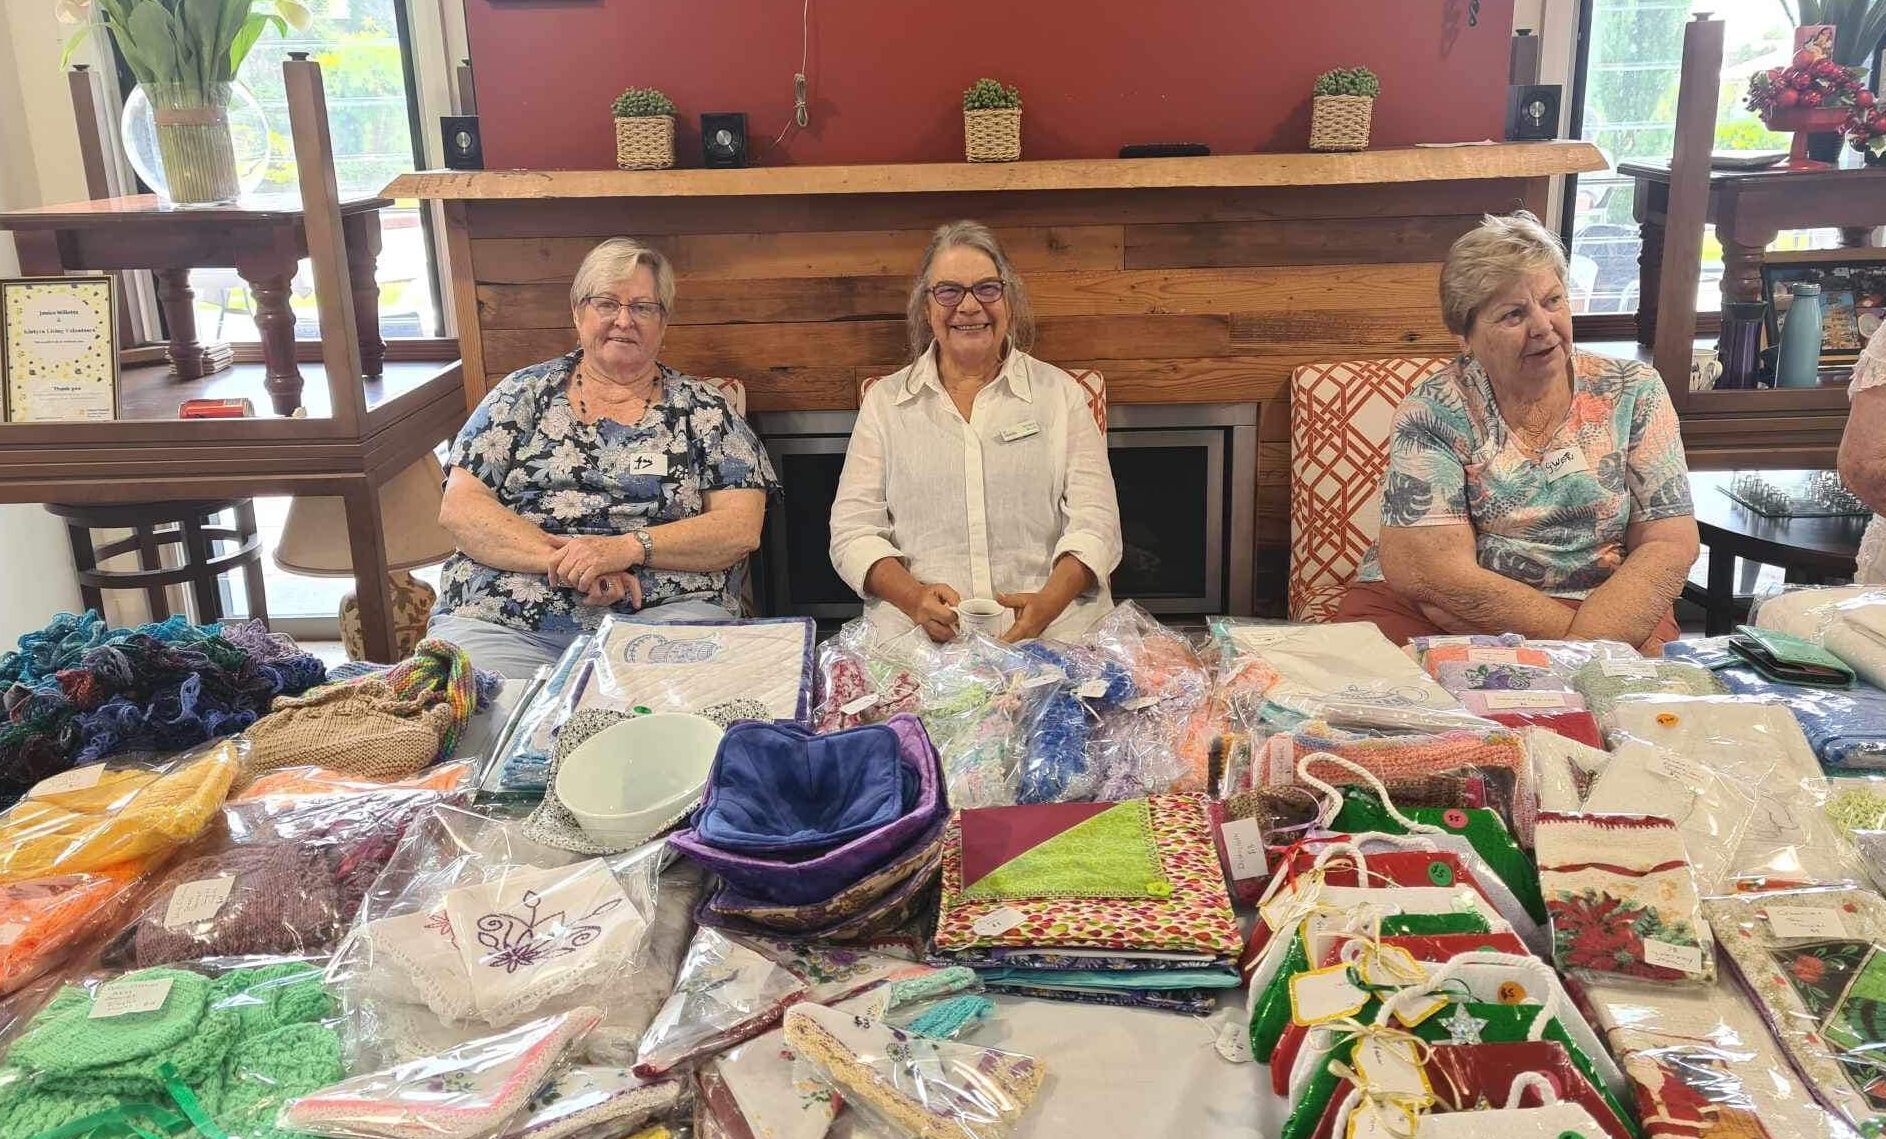 Sewers show off their goods at the quilt show